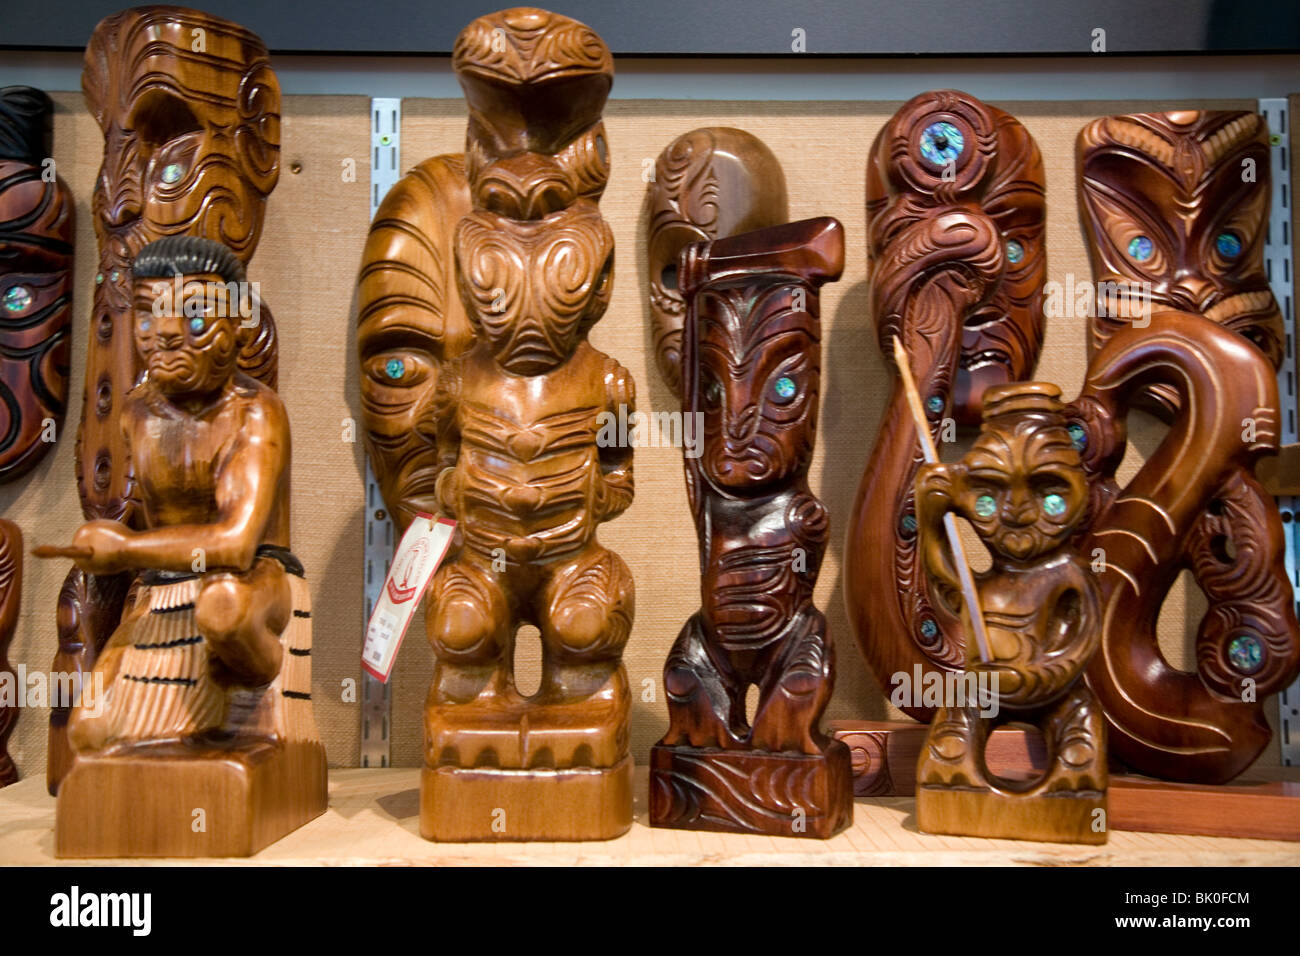 Wood carvings in Maori culture can be found decorating traditional structures and as art sculptures throughout New Zealand Stock Photo